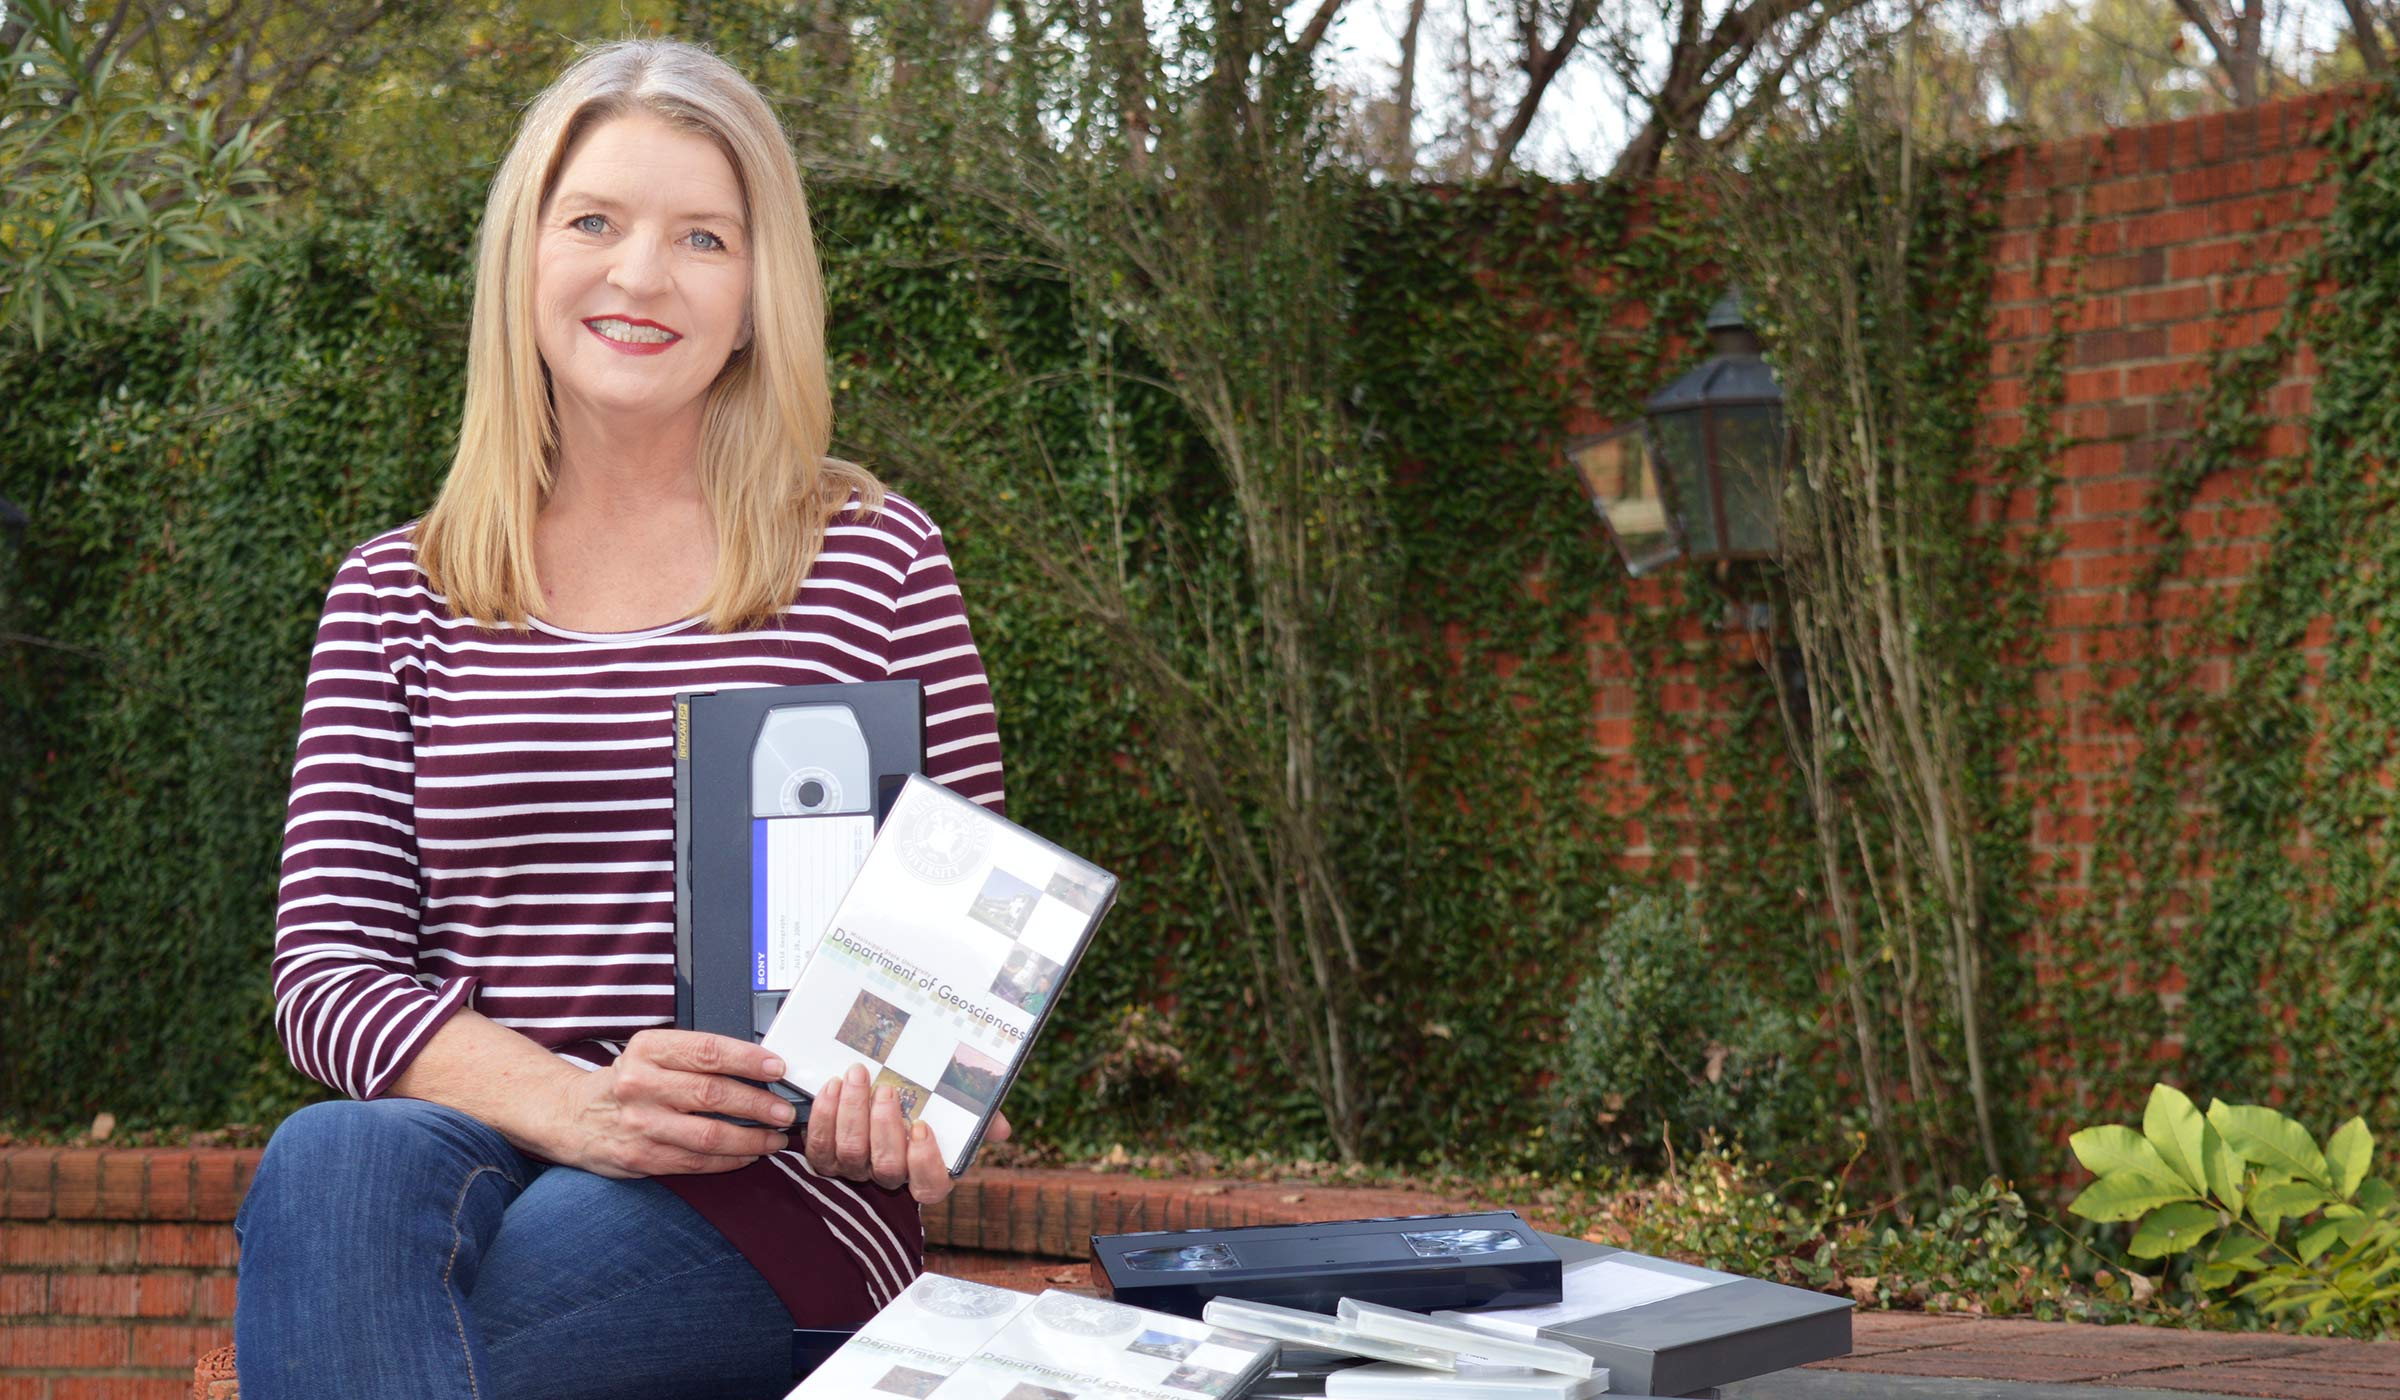 Joy Bailey, pictured holding old VCR tapes